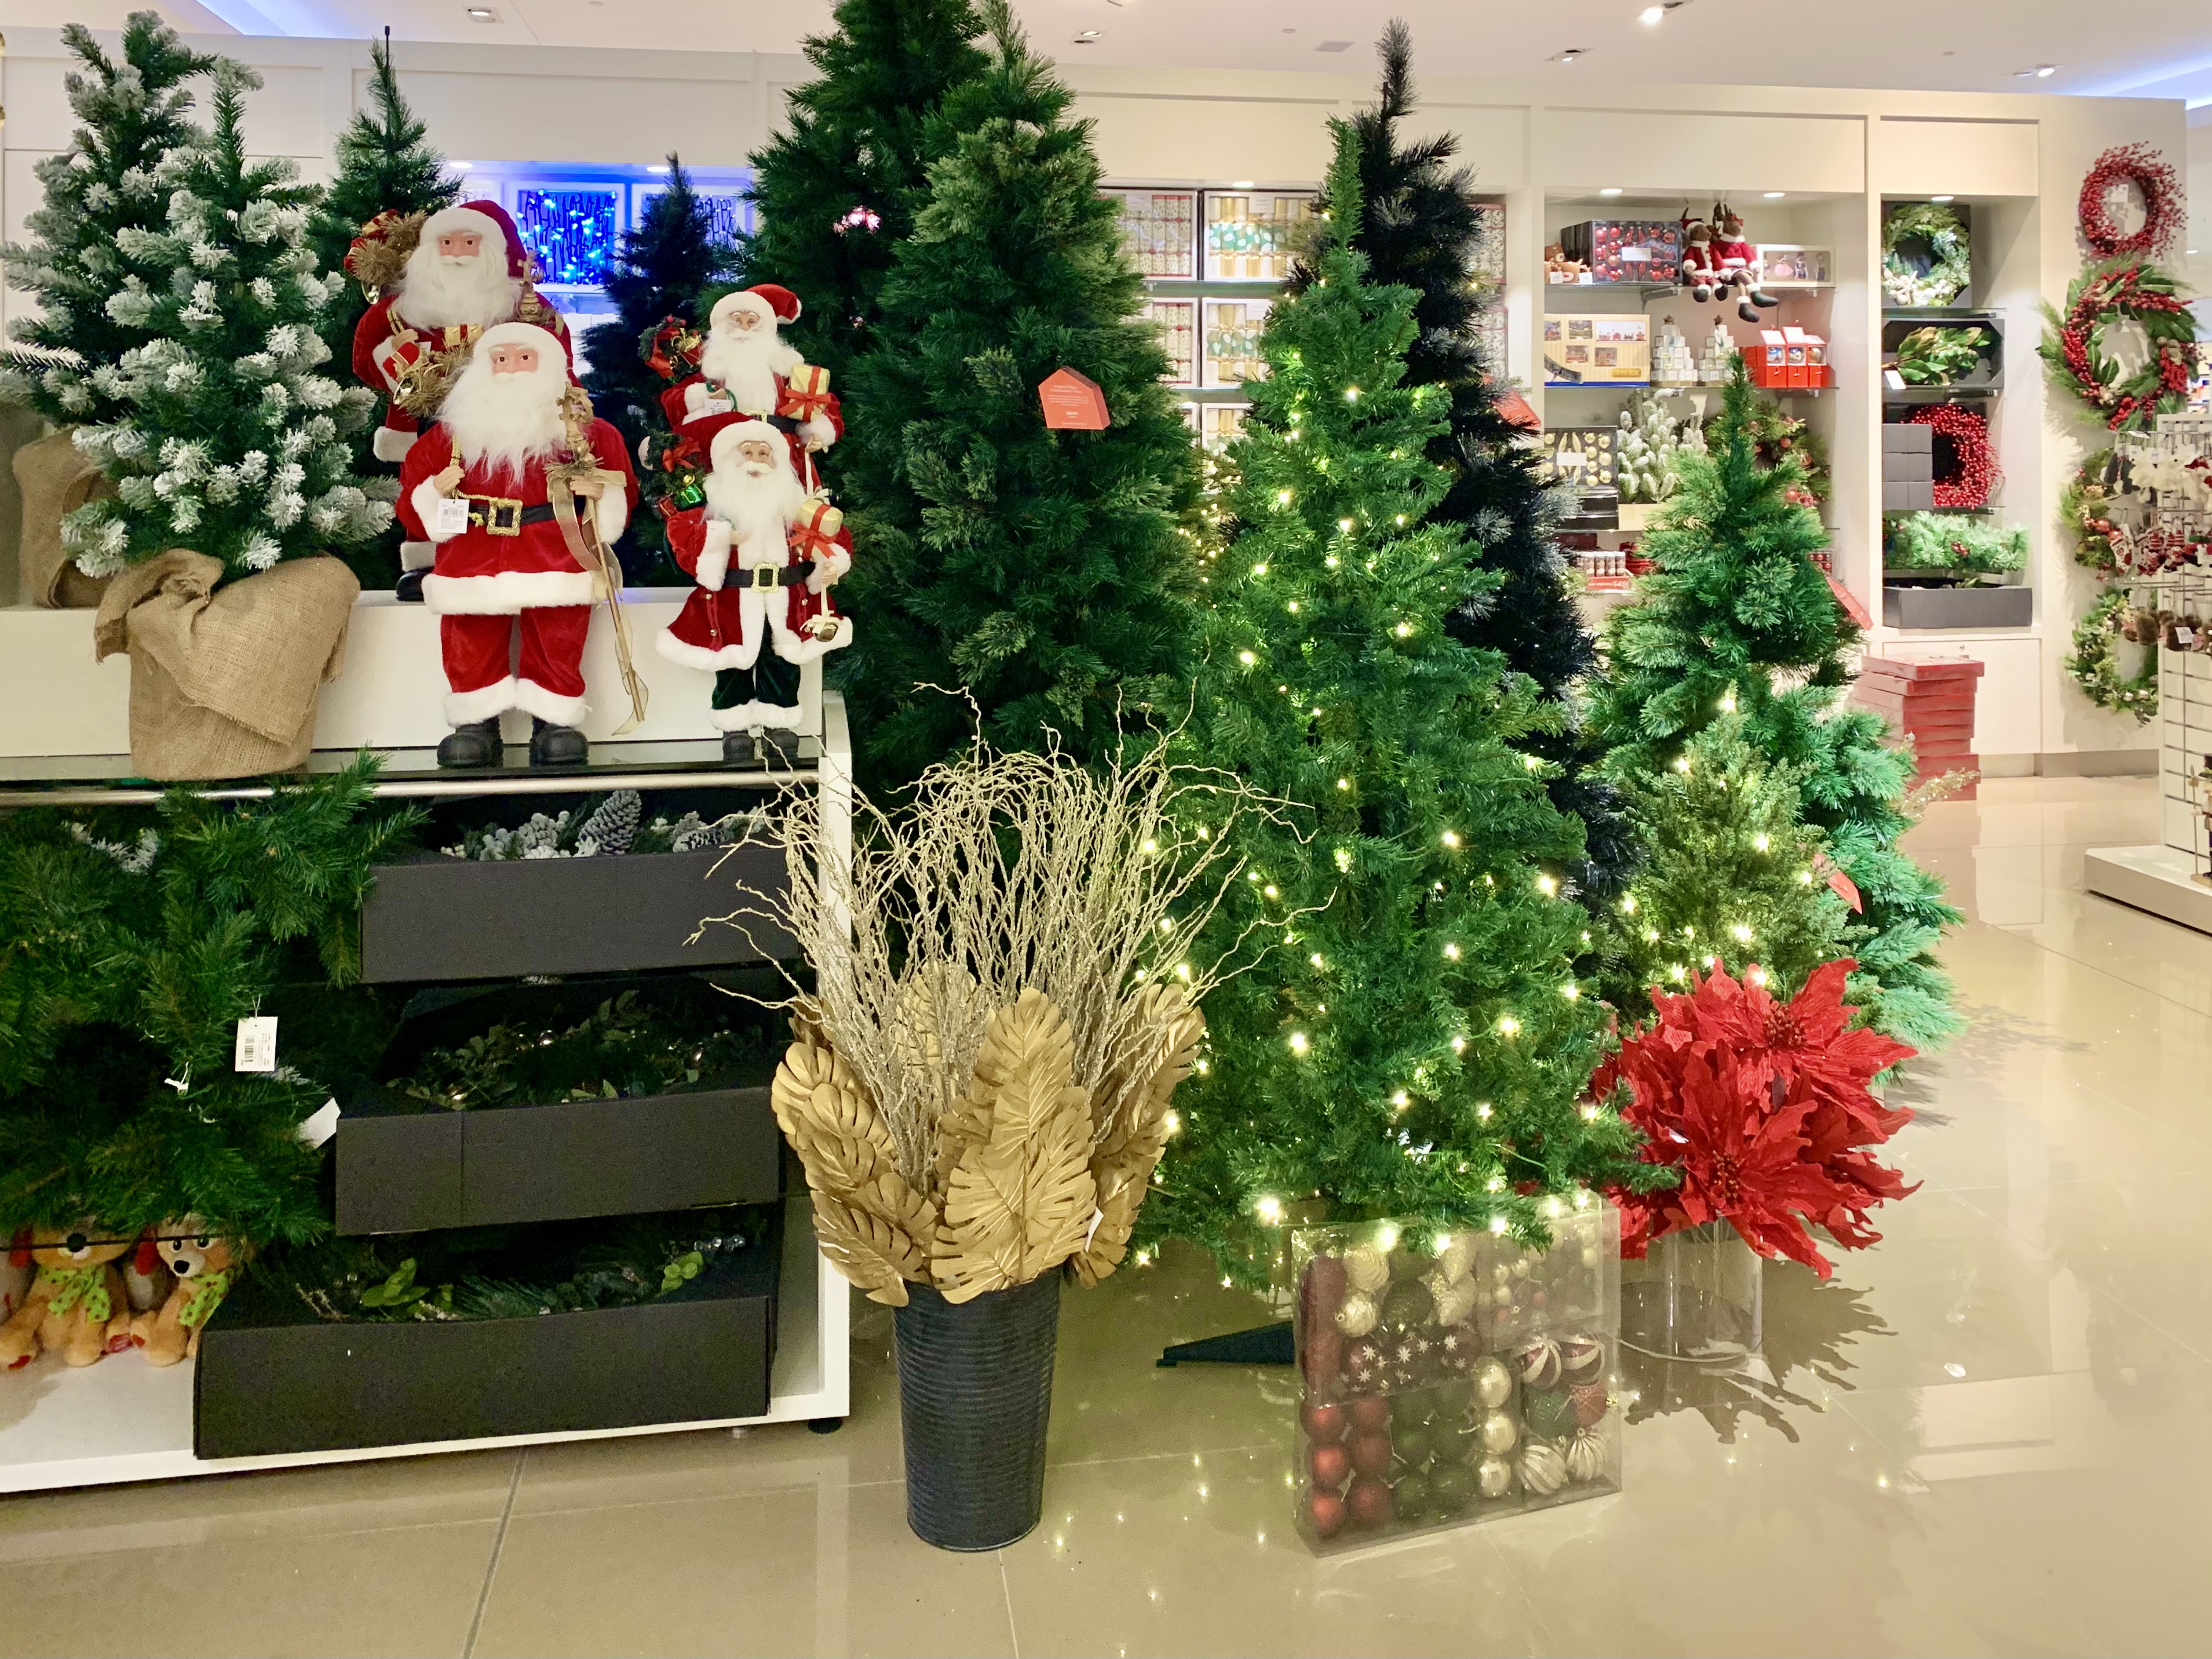 File:Christmas trees and decorations in Christmas shop in Brisbane ...